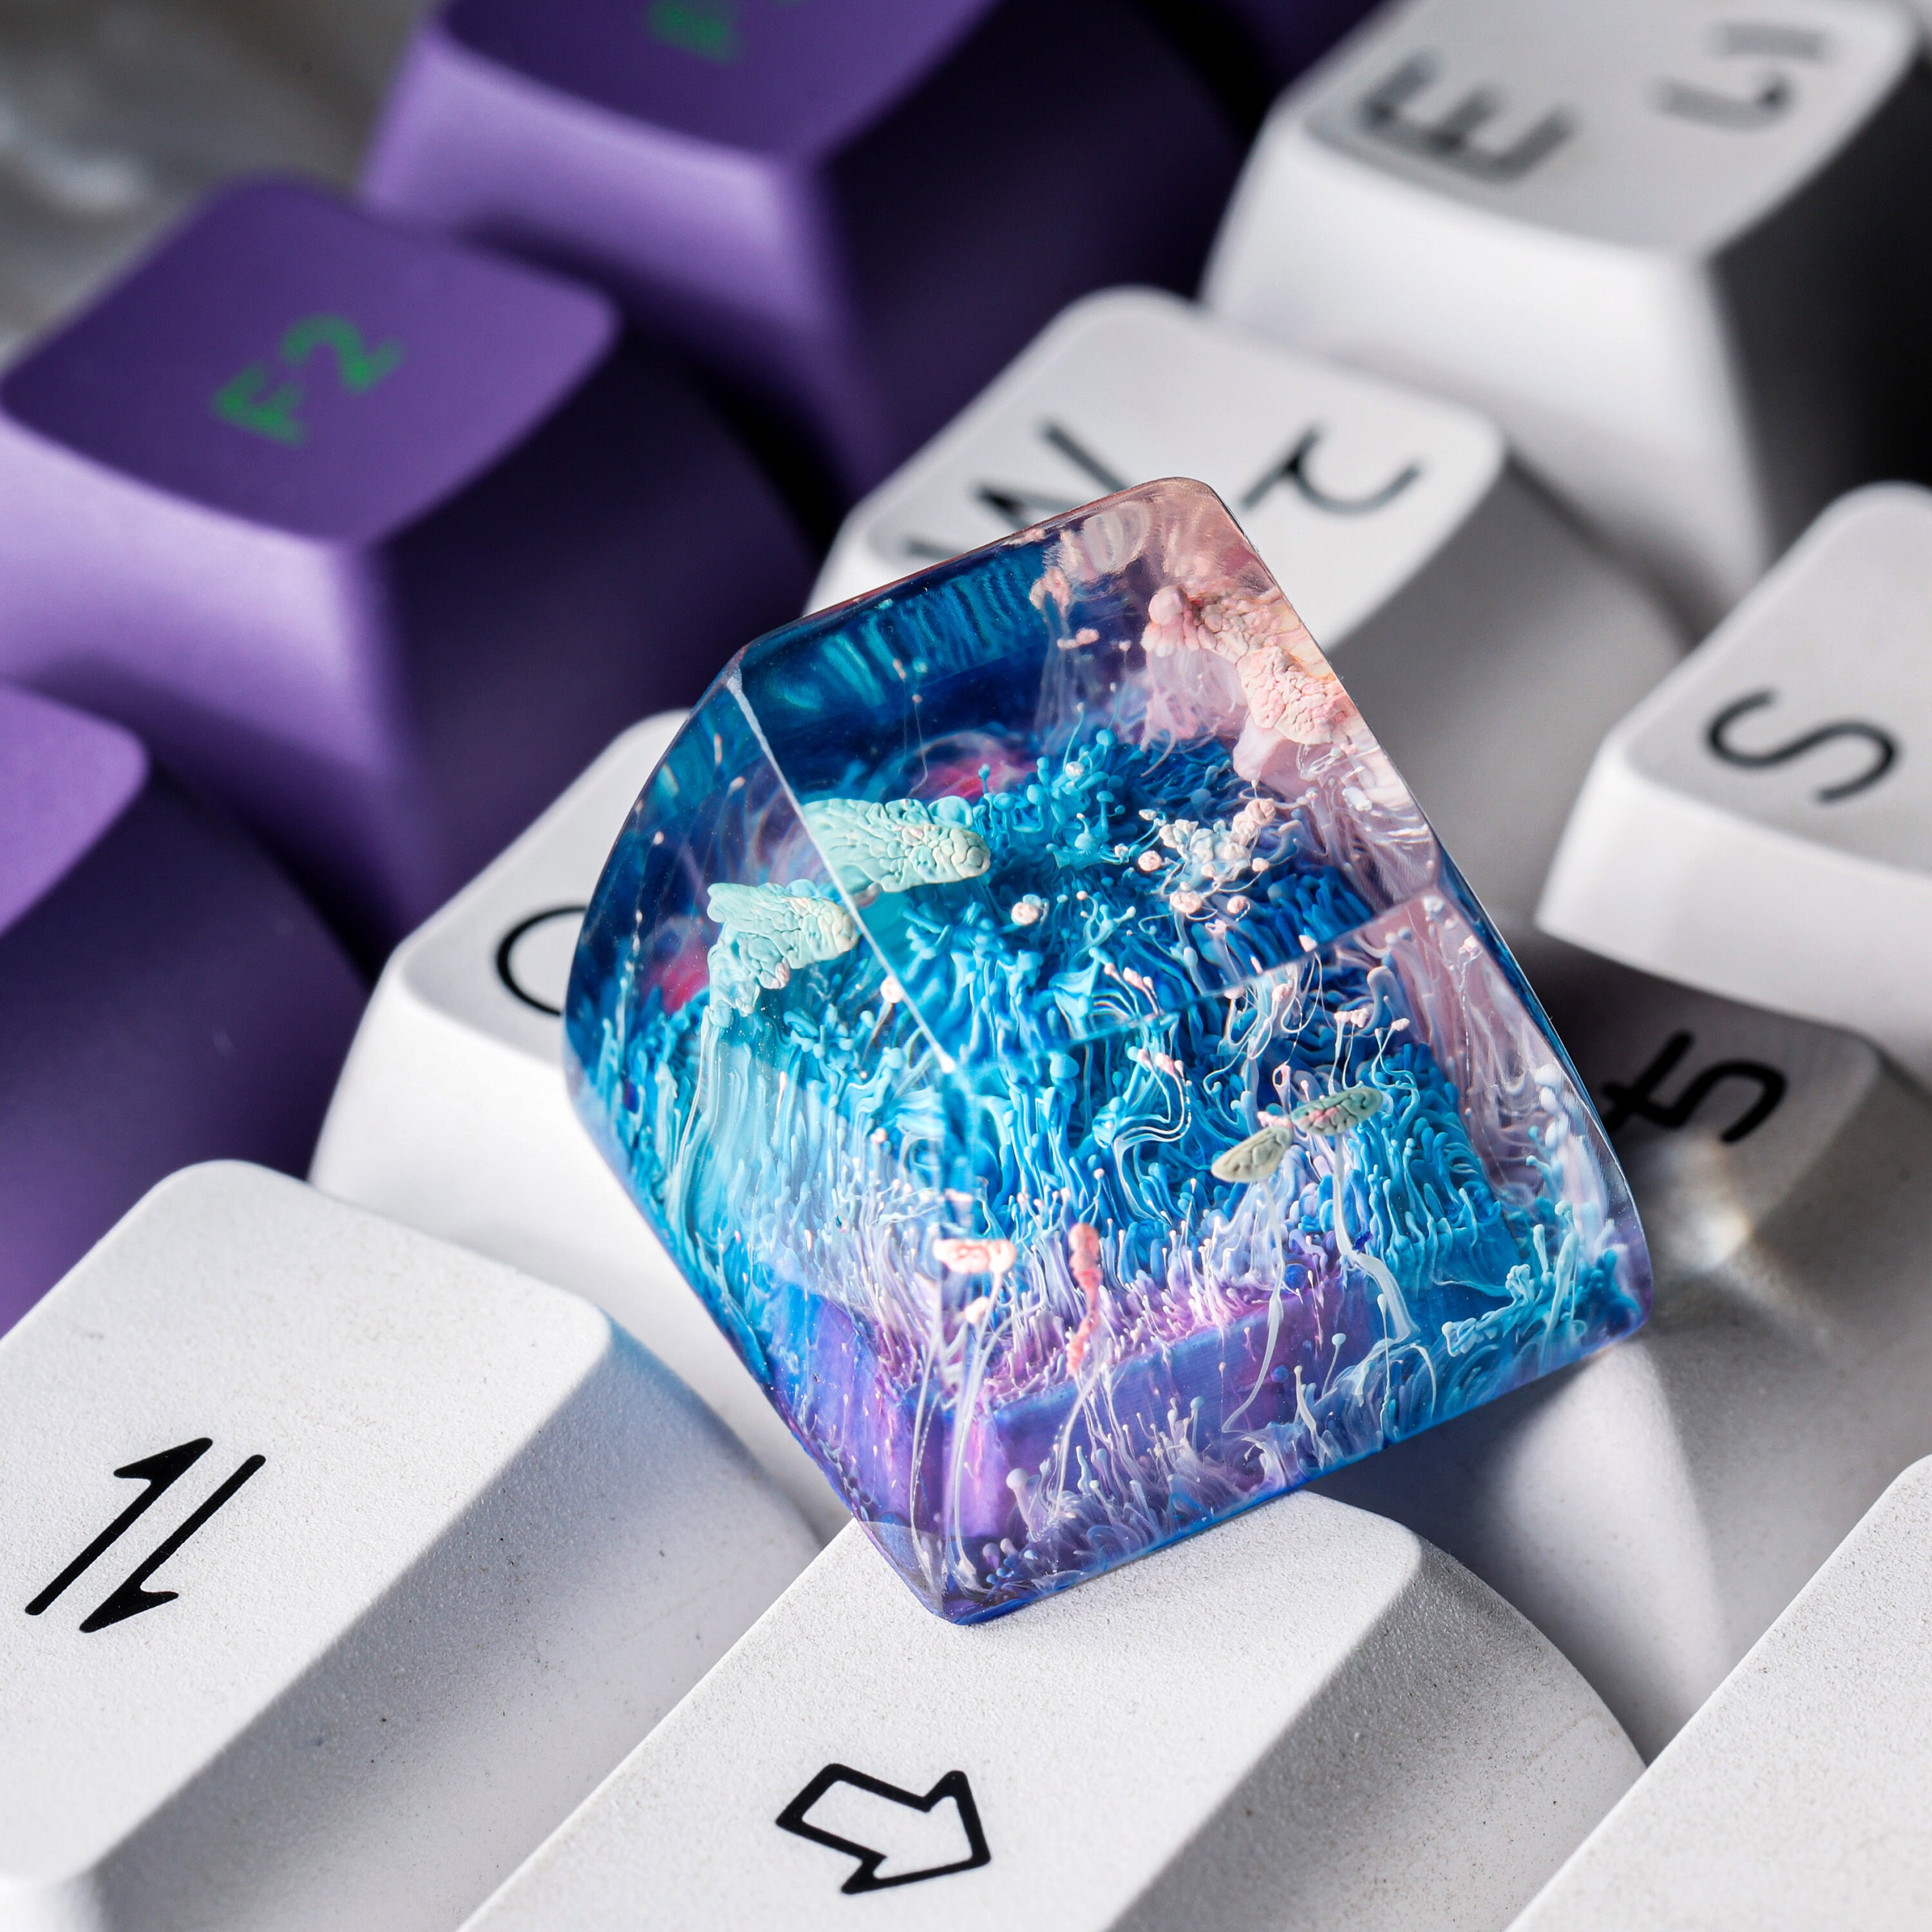 Pink and Blue Coral Keycap,  Ocean Keycap, Keycap For Cherry MX Switches Keyboard, Handmade Gift